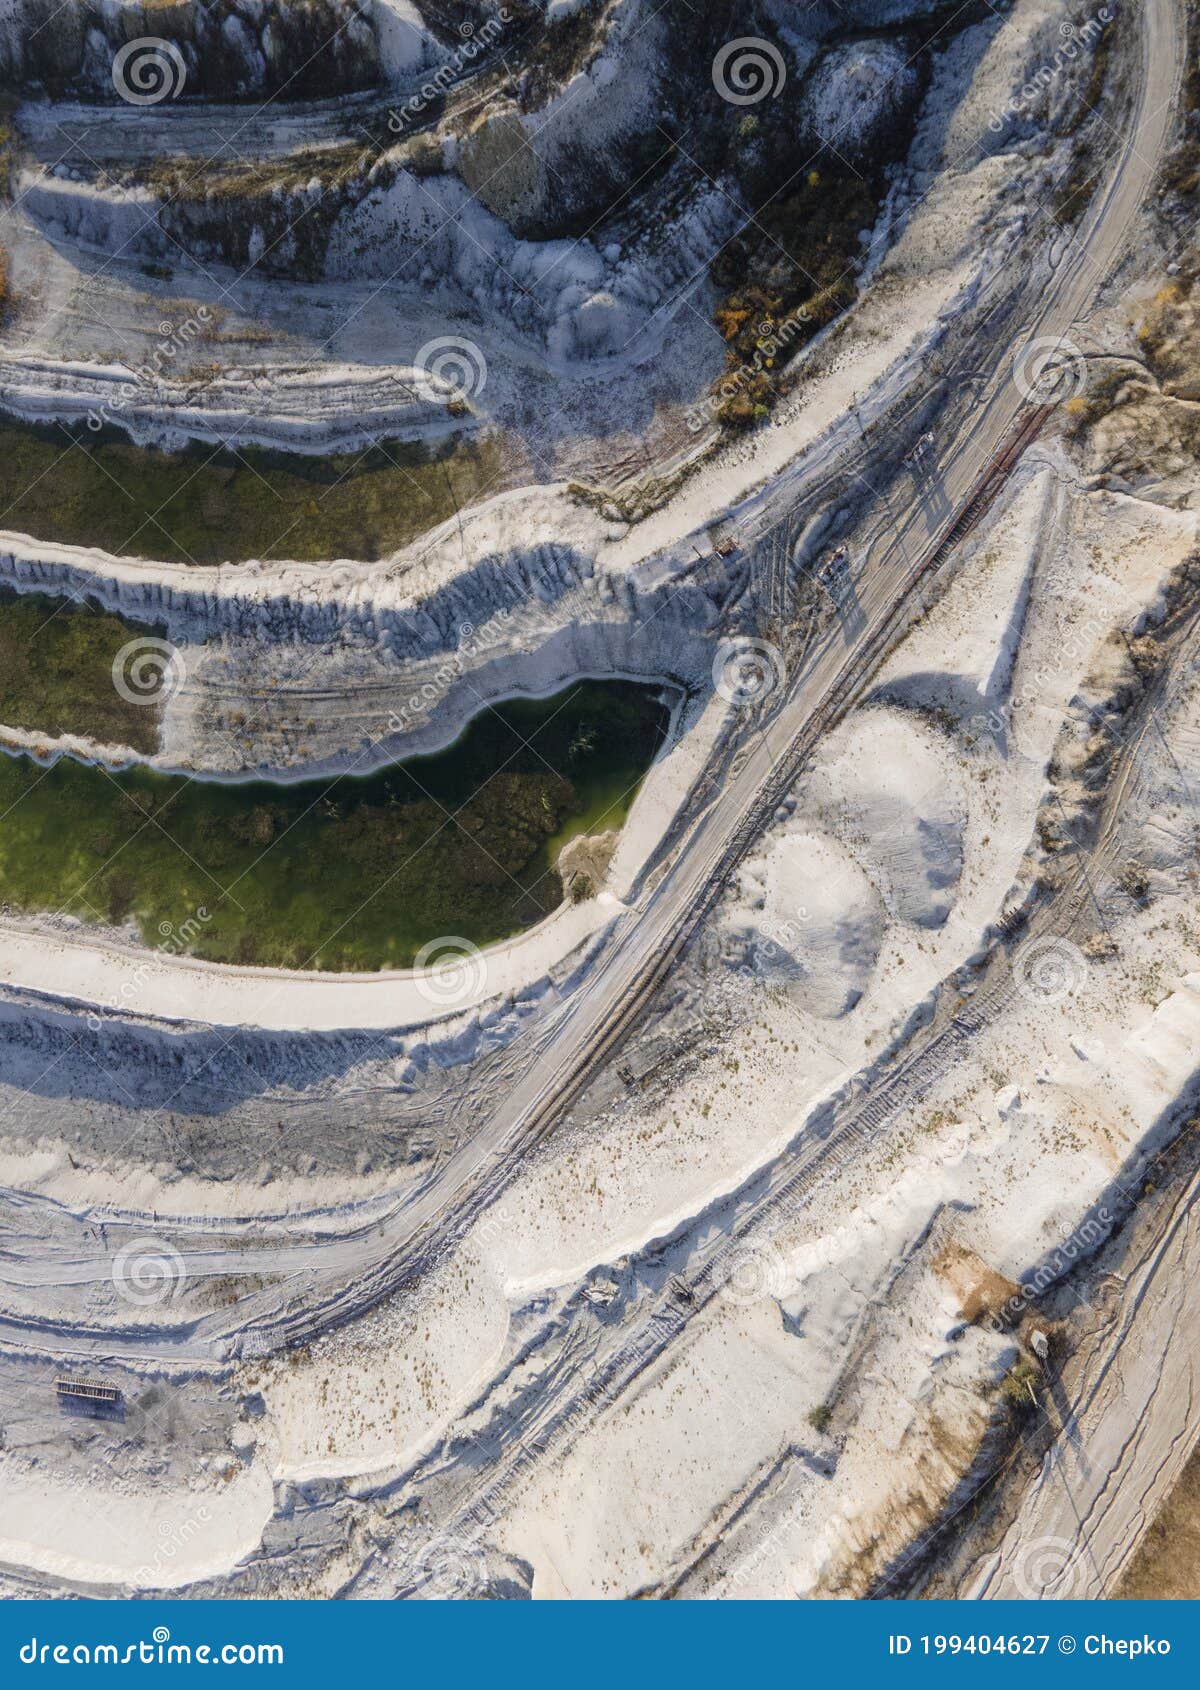 opencast mining quarry - aerial view. industrial extraction of lime, chalk, calx, caol